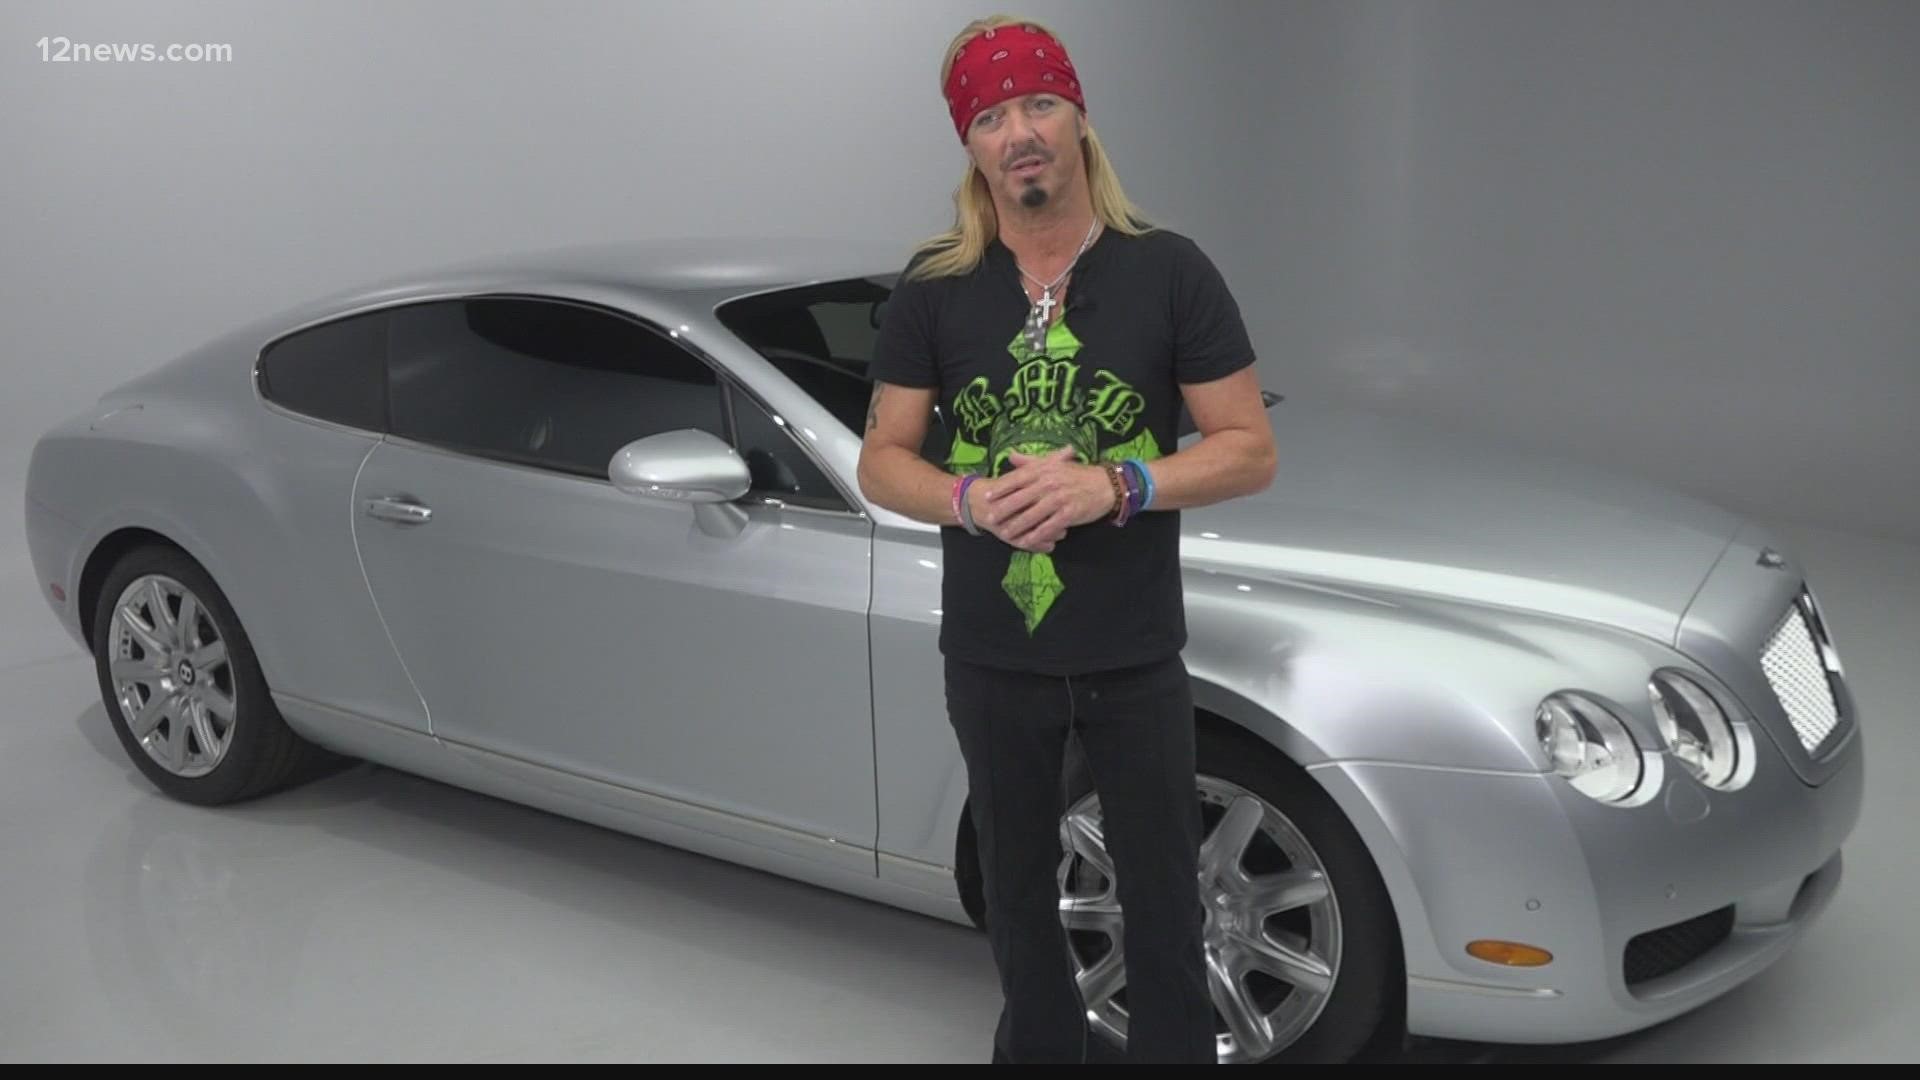 Bret Michaels calls it a "rock star car," and that’s coming from a music icon himself.